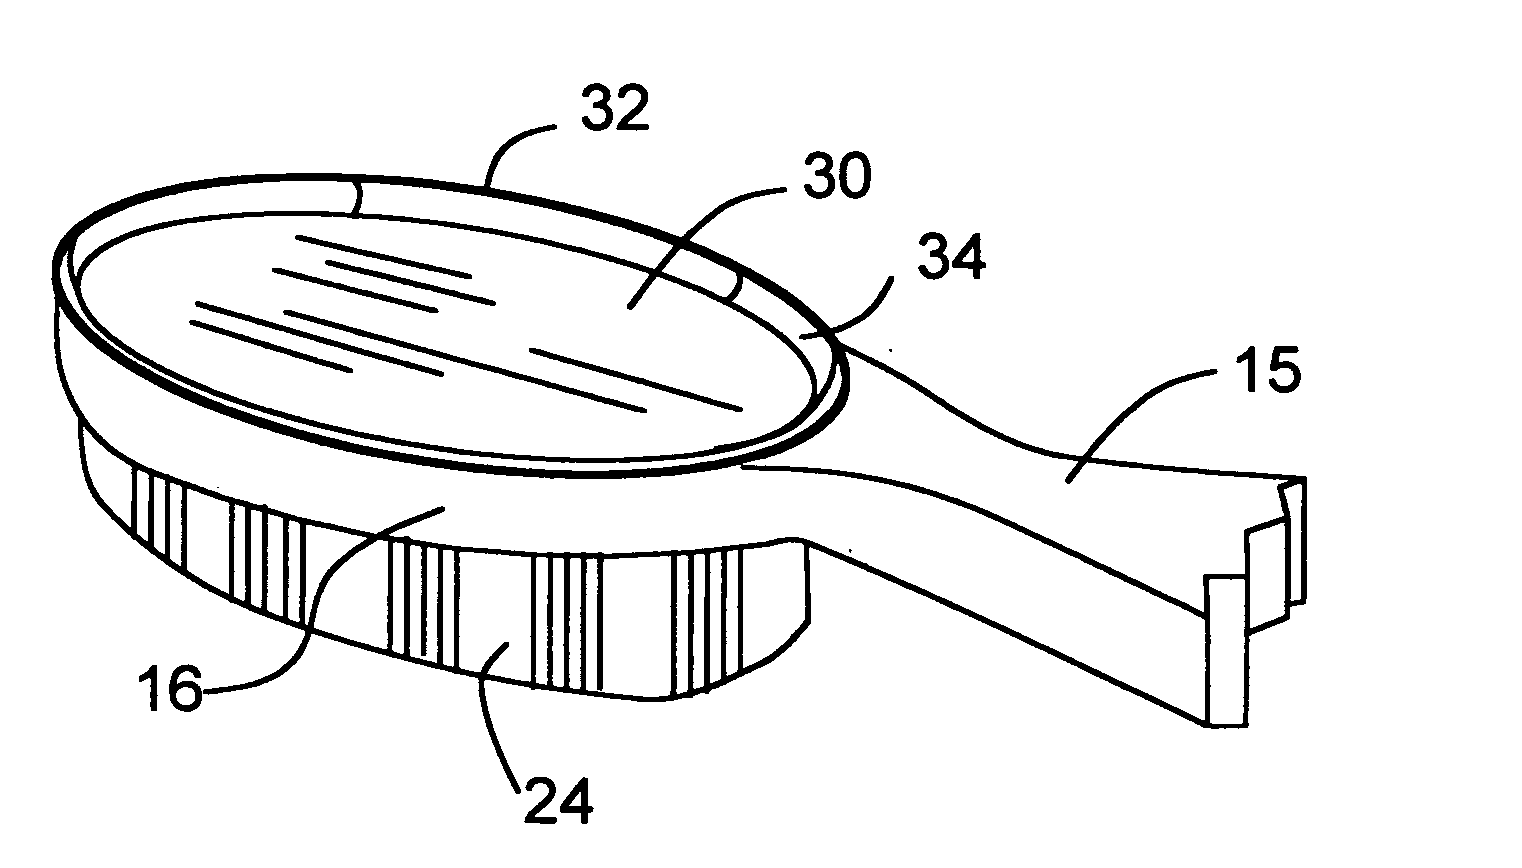 Comprehensive-hygiene toothbrush and tongue-cleaning apparatus